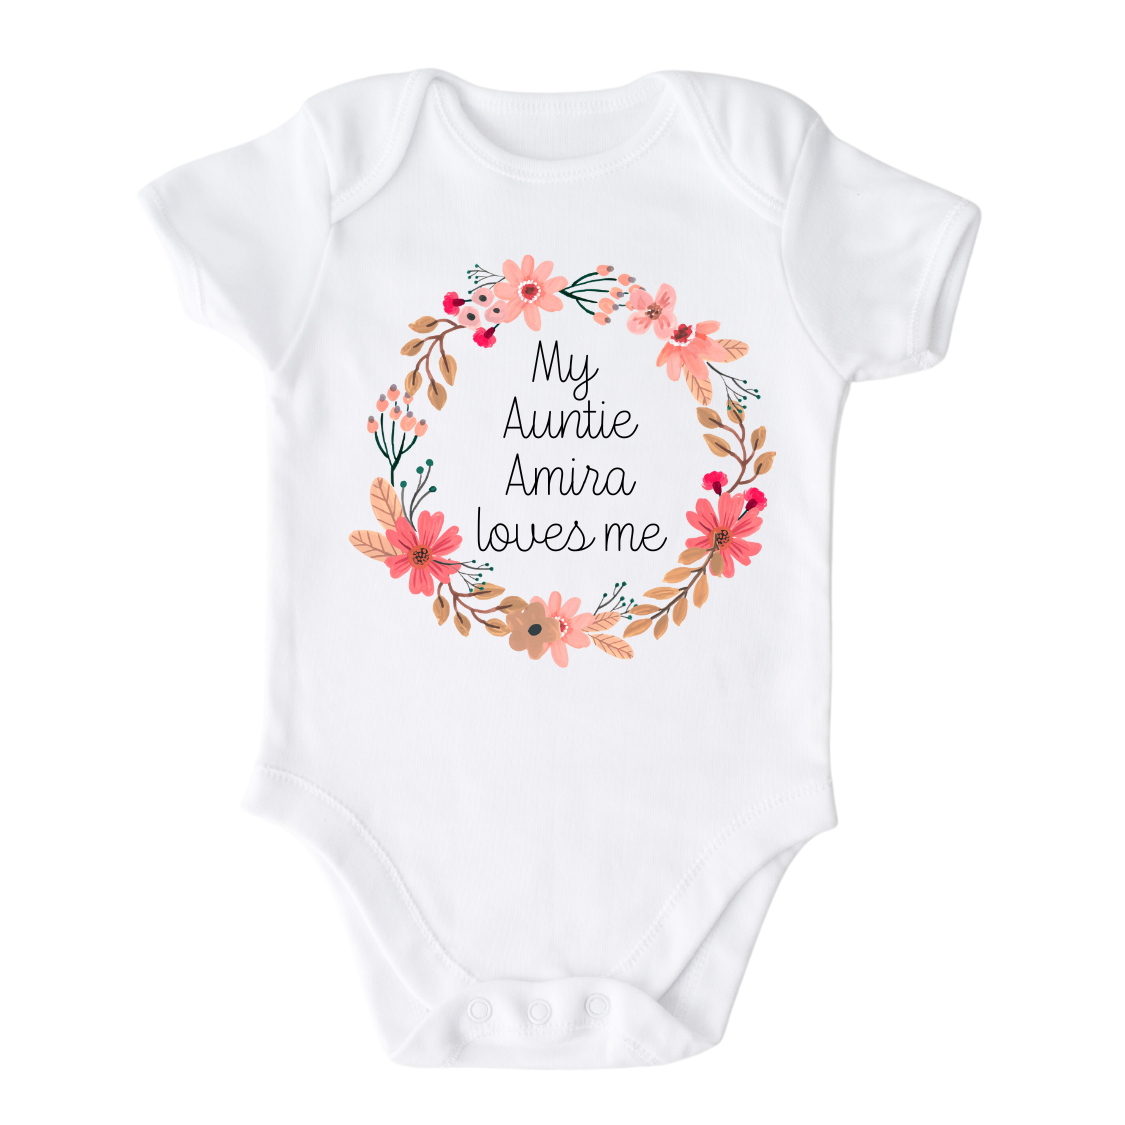 Kid Tshirt and Baby Onesie featuring a floral wreath design and customizable text 'My Auntie Loves Me.